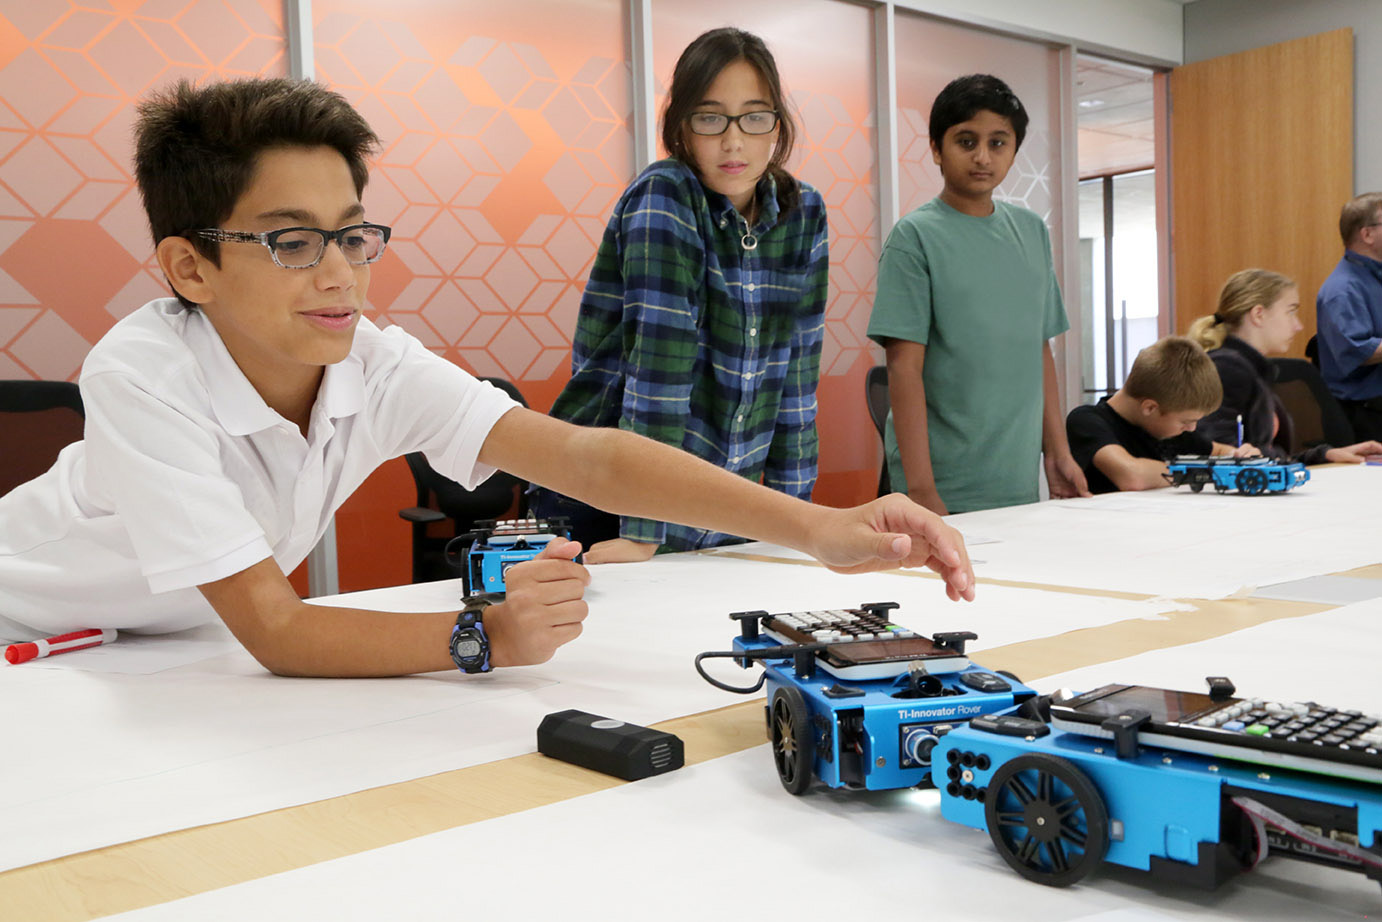 When the TI-Innovator Rover is moving, students are learning in a fun, interactive and hands-on way.